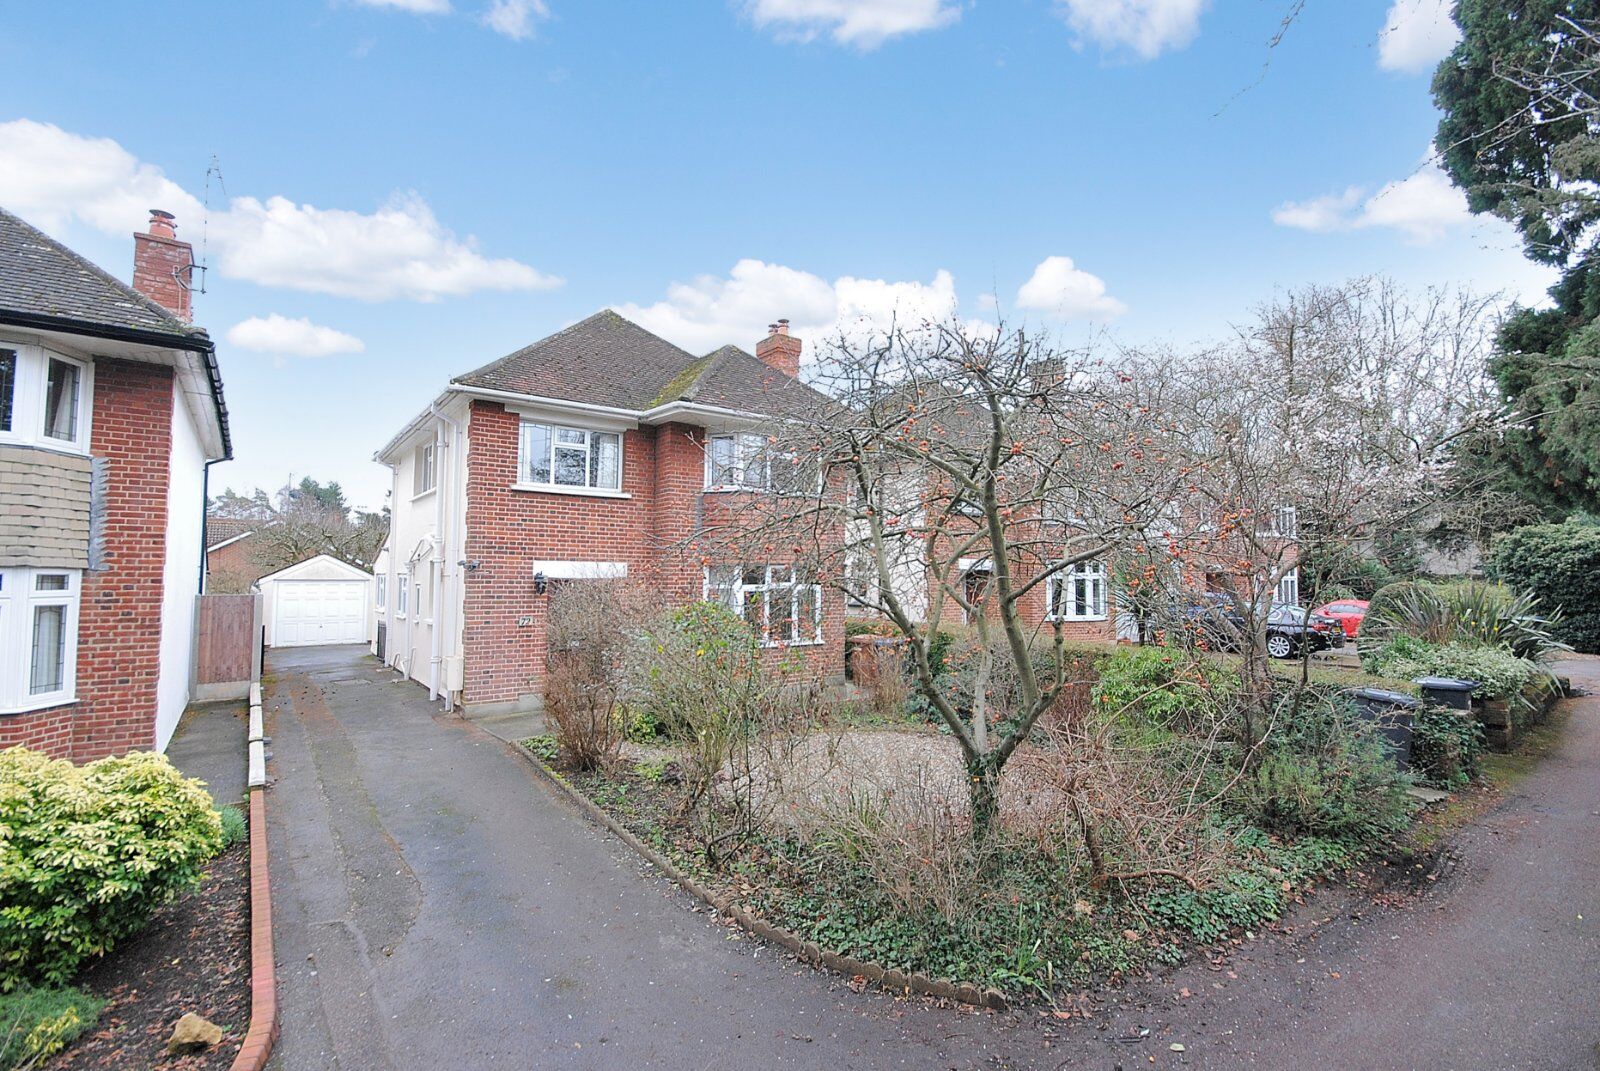 3 bedroom detached house for sale Stansted Road, CM23, main image